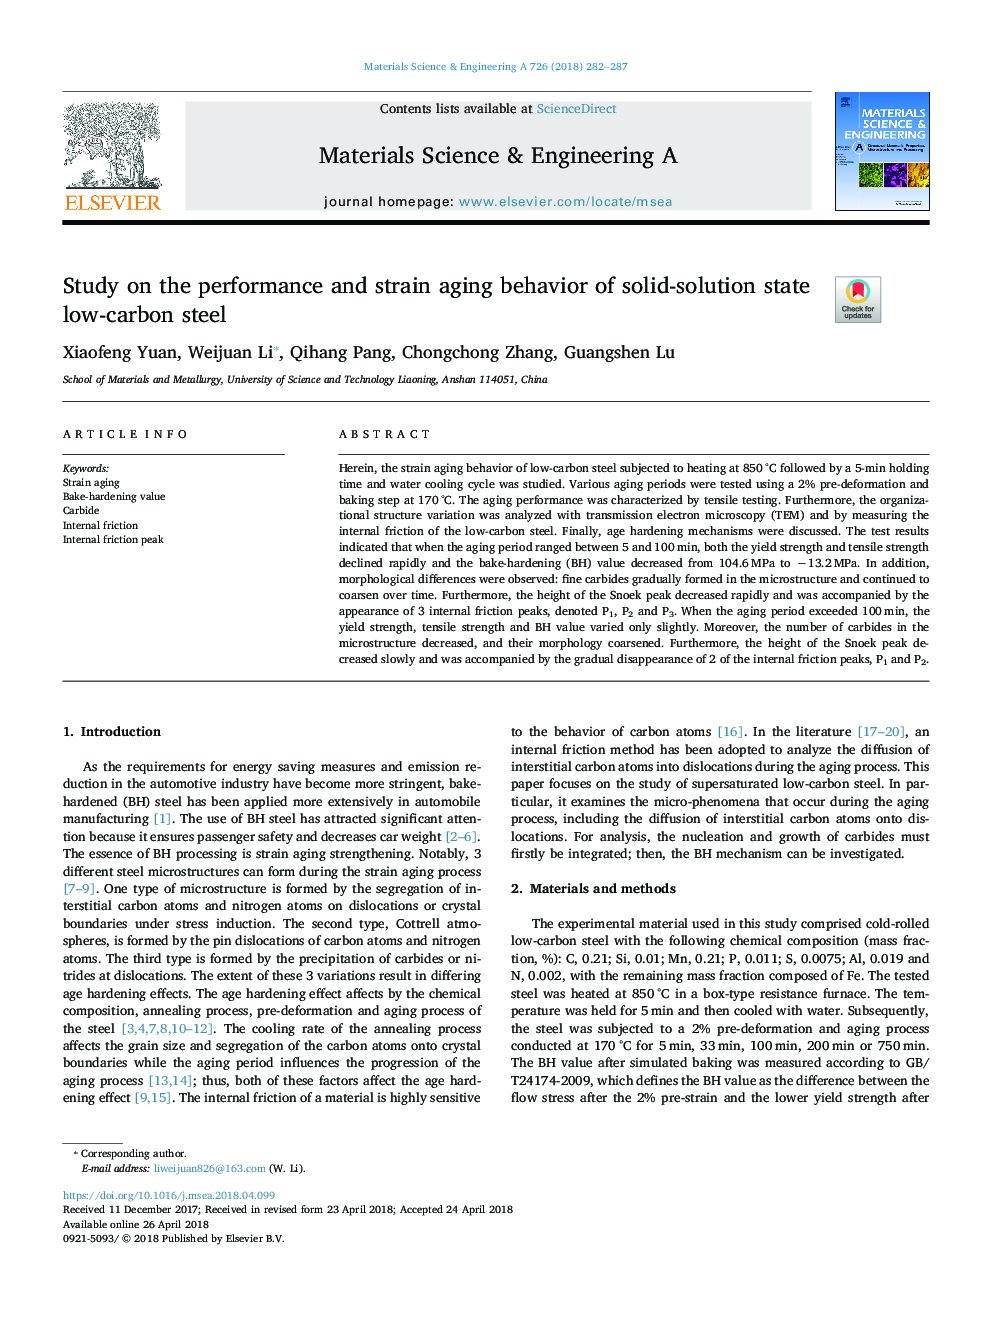 Study on the performance and strain aging behavior of solid-solution state low-carbon steel